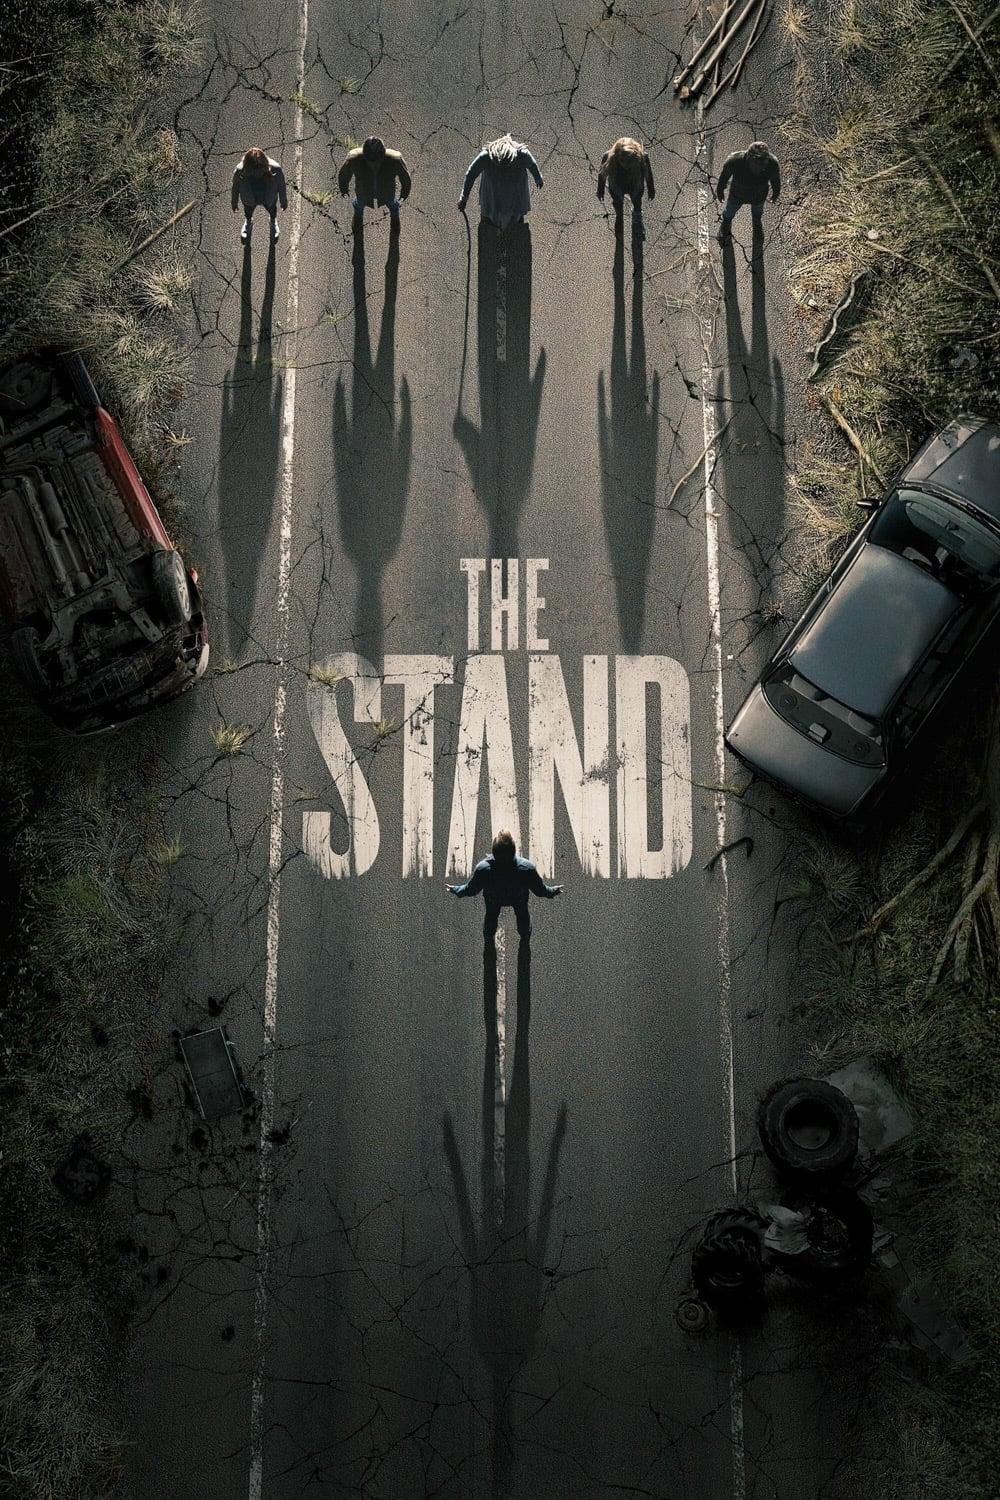 The Stand poster